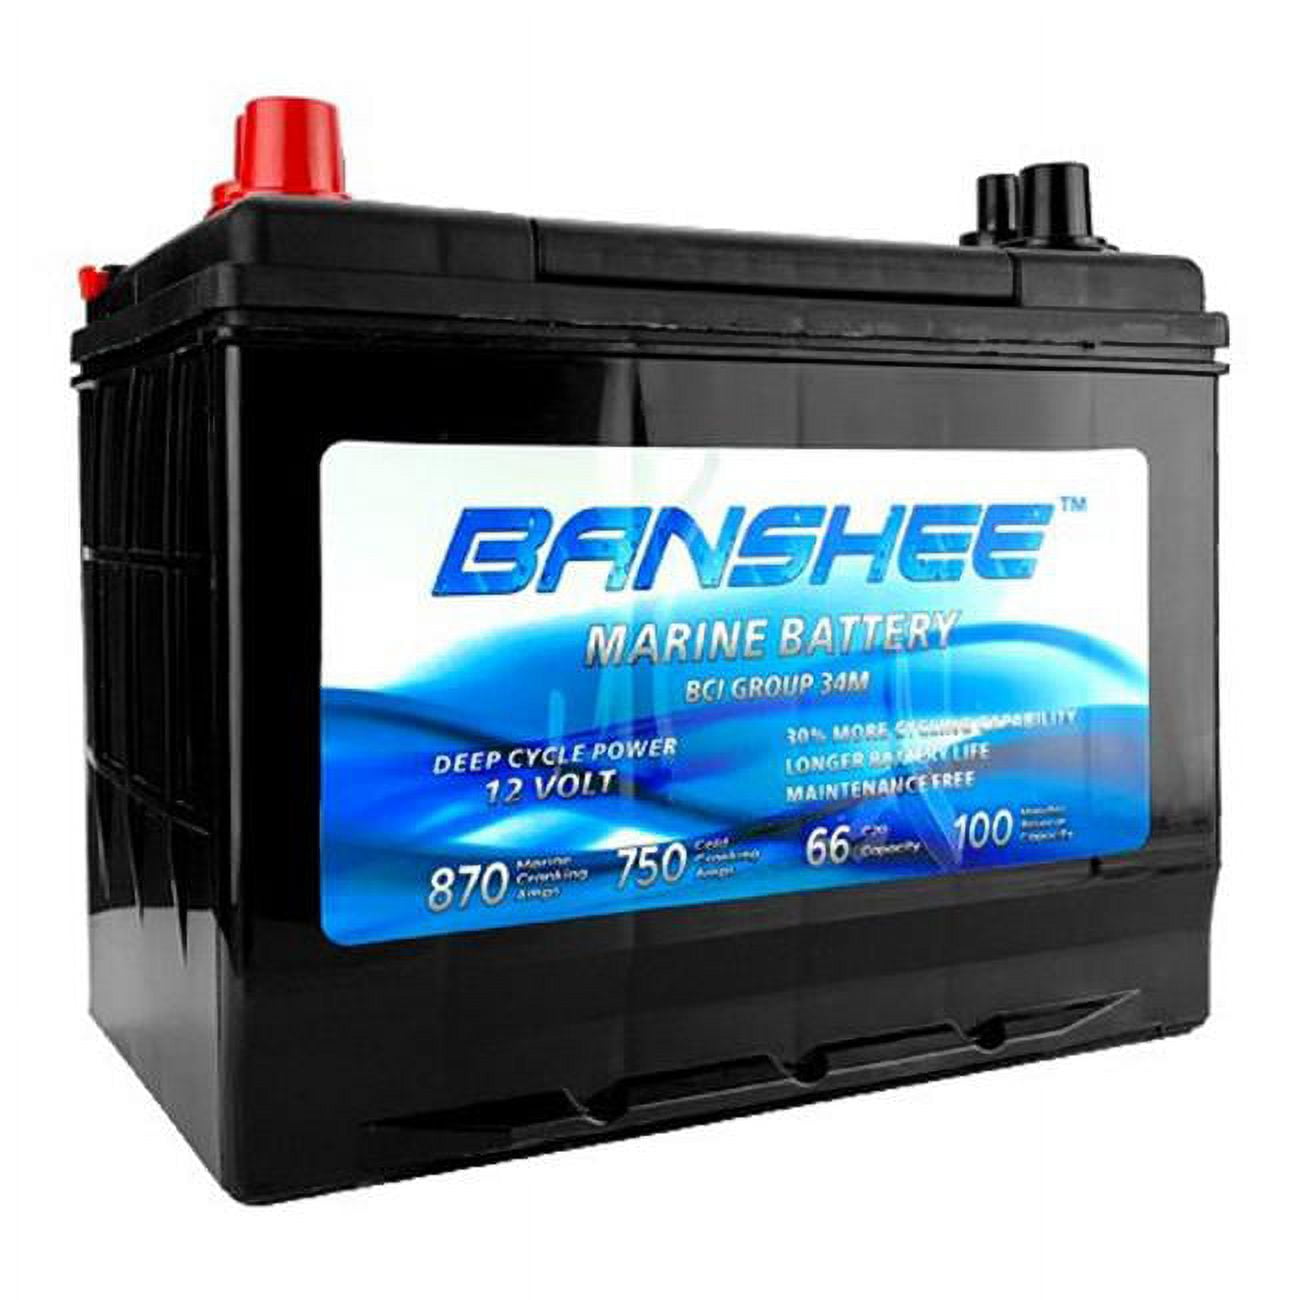 Picture of Banshee 34M-Banshee-02 12V Deep Cycle Marine Battery for Replacement Optima 34M - Group Size 34